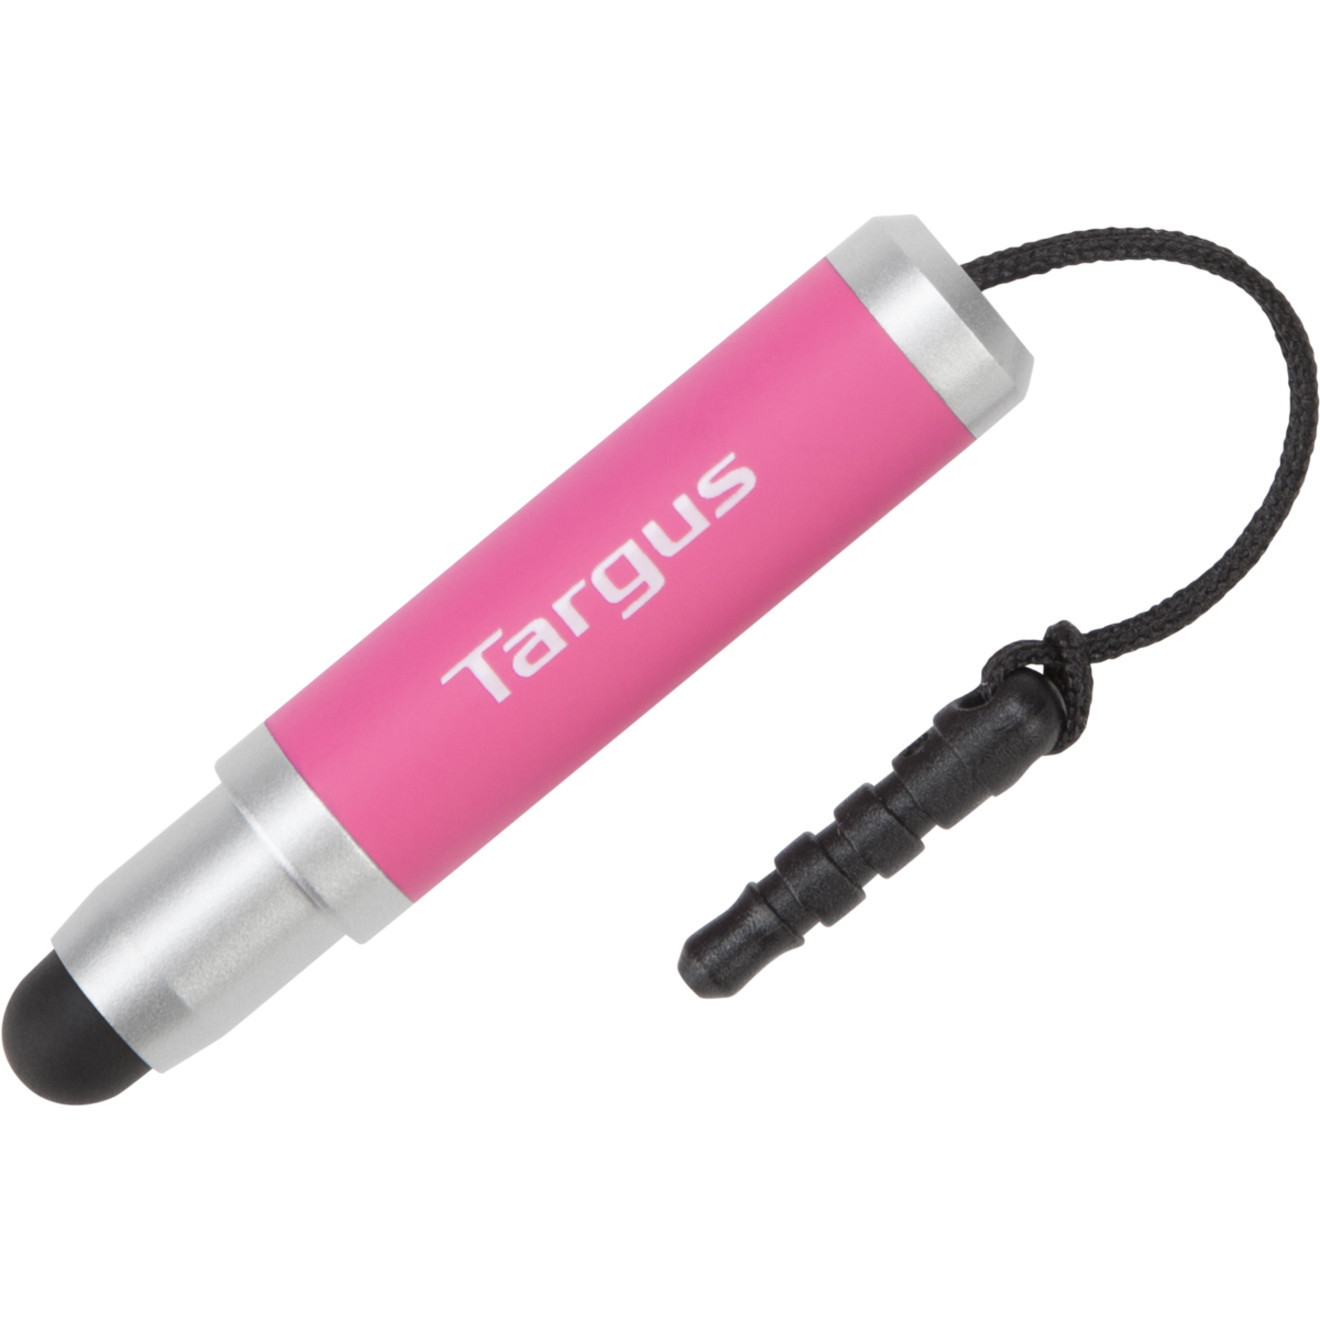 Targus mini Stylus (Pink)Capacitive Touchscreen Type SupportedPink AMM16701US